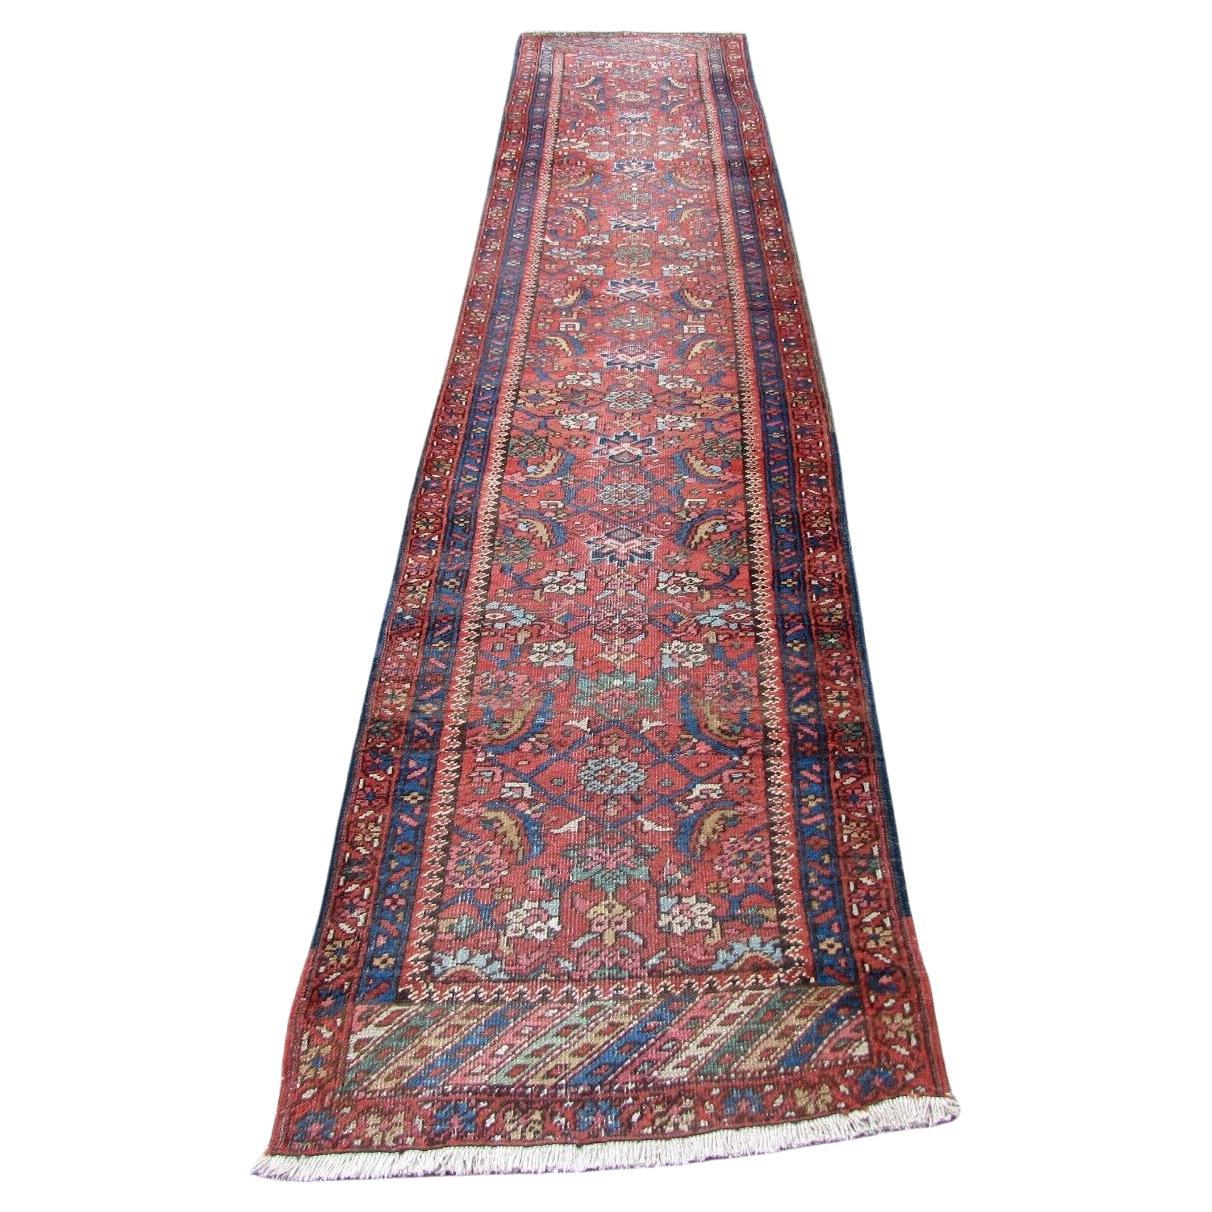 Handmade Antique Persian Style Mahal Runner Rug 2.5' x 12.1', 1920s, 1Q57 For Sale